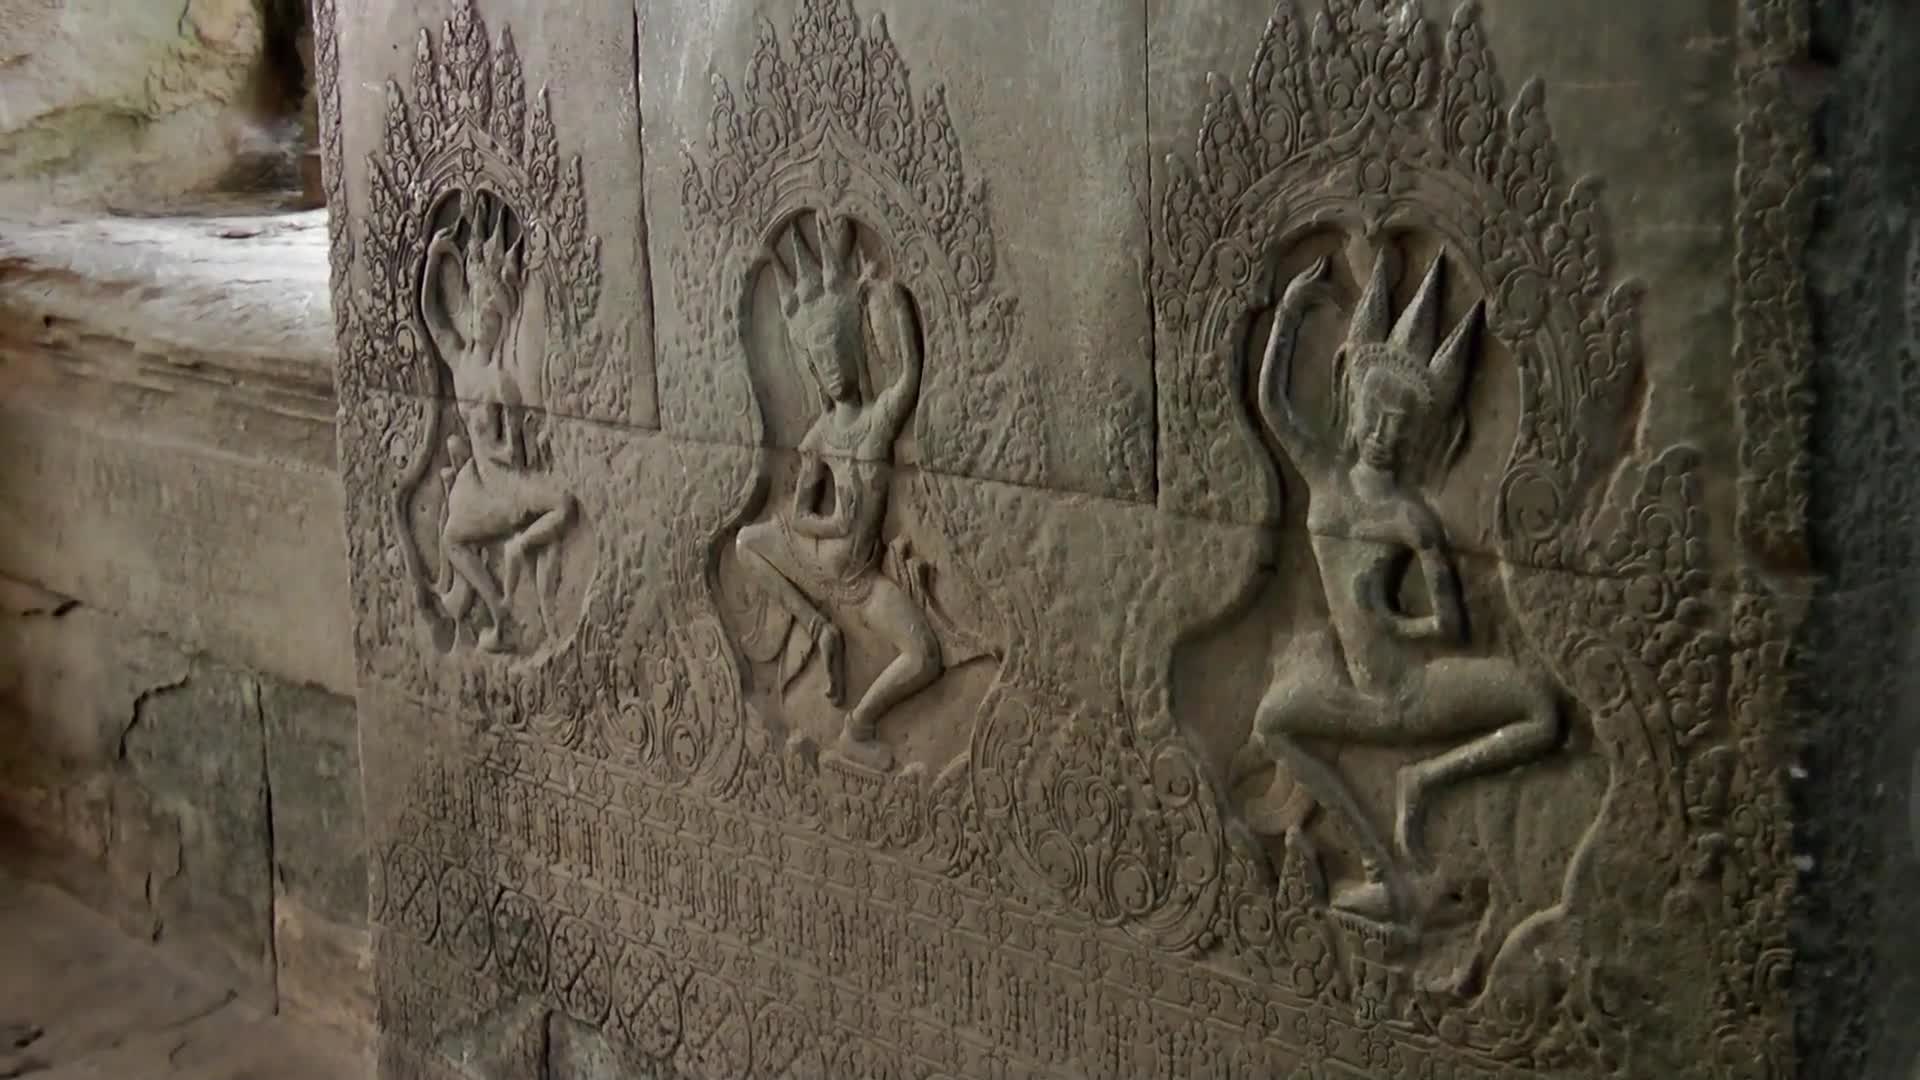 The Stones Of Angkor